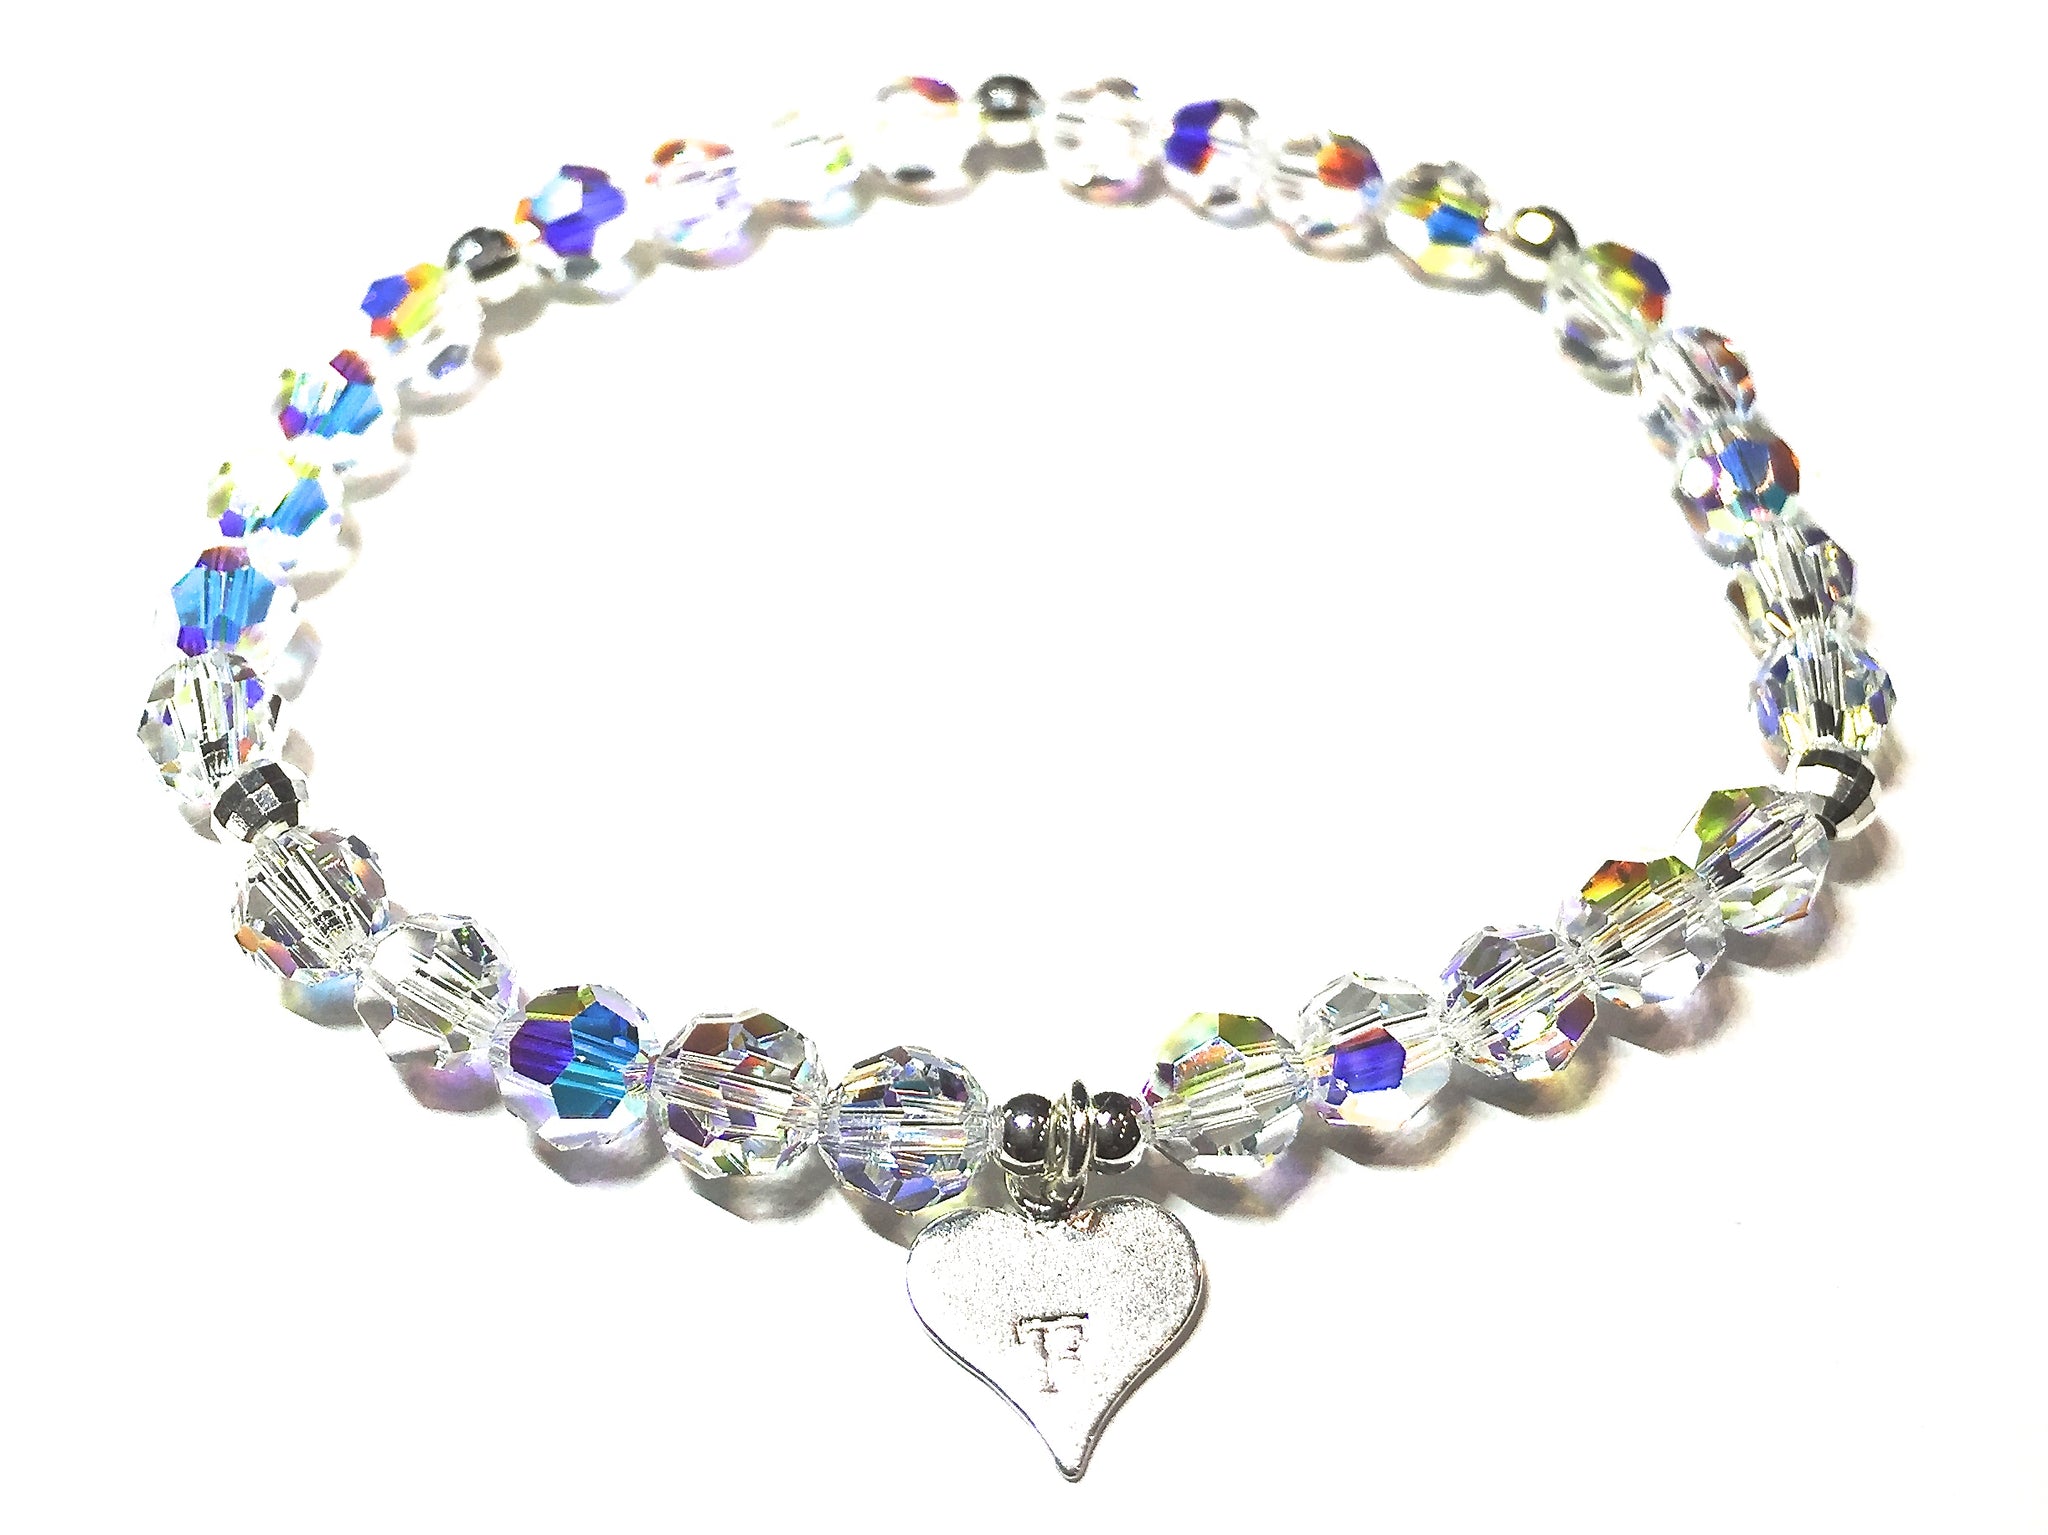 Childrens Swarovski Charmed Bracelets (Available in 3 Different Colors)